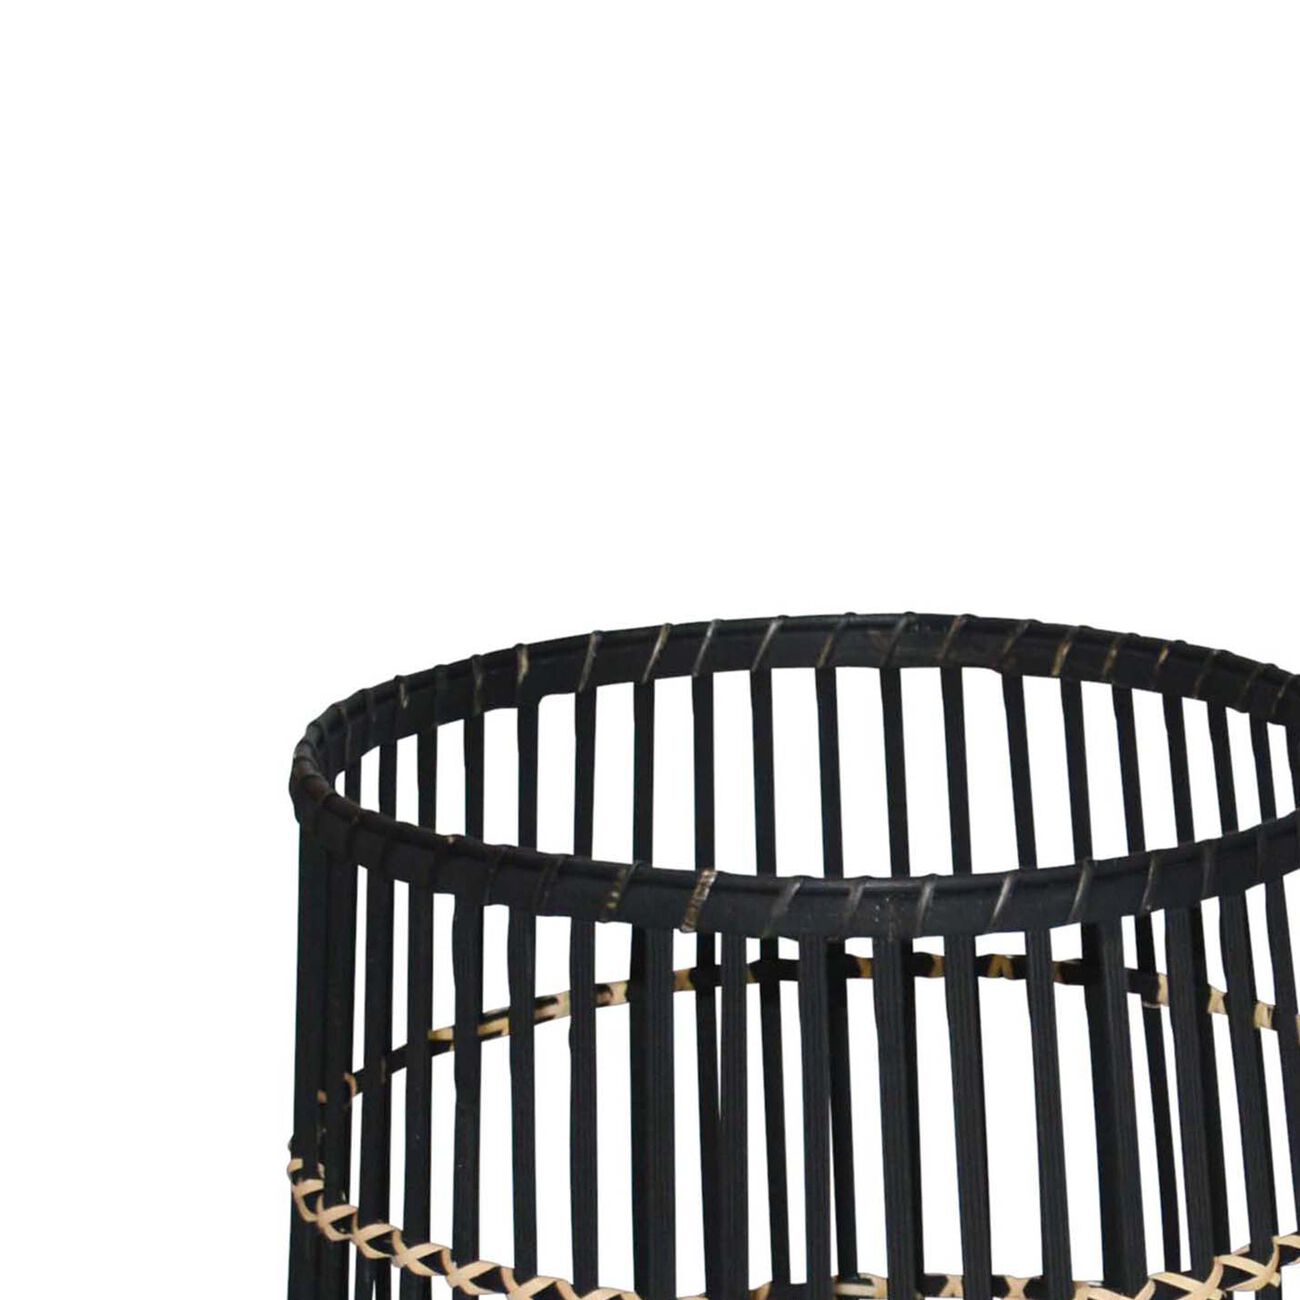 Drum Shaped Open Cage Bamboo Planter with Angled Legs, Set of 3, Black